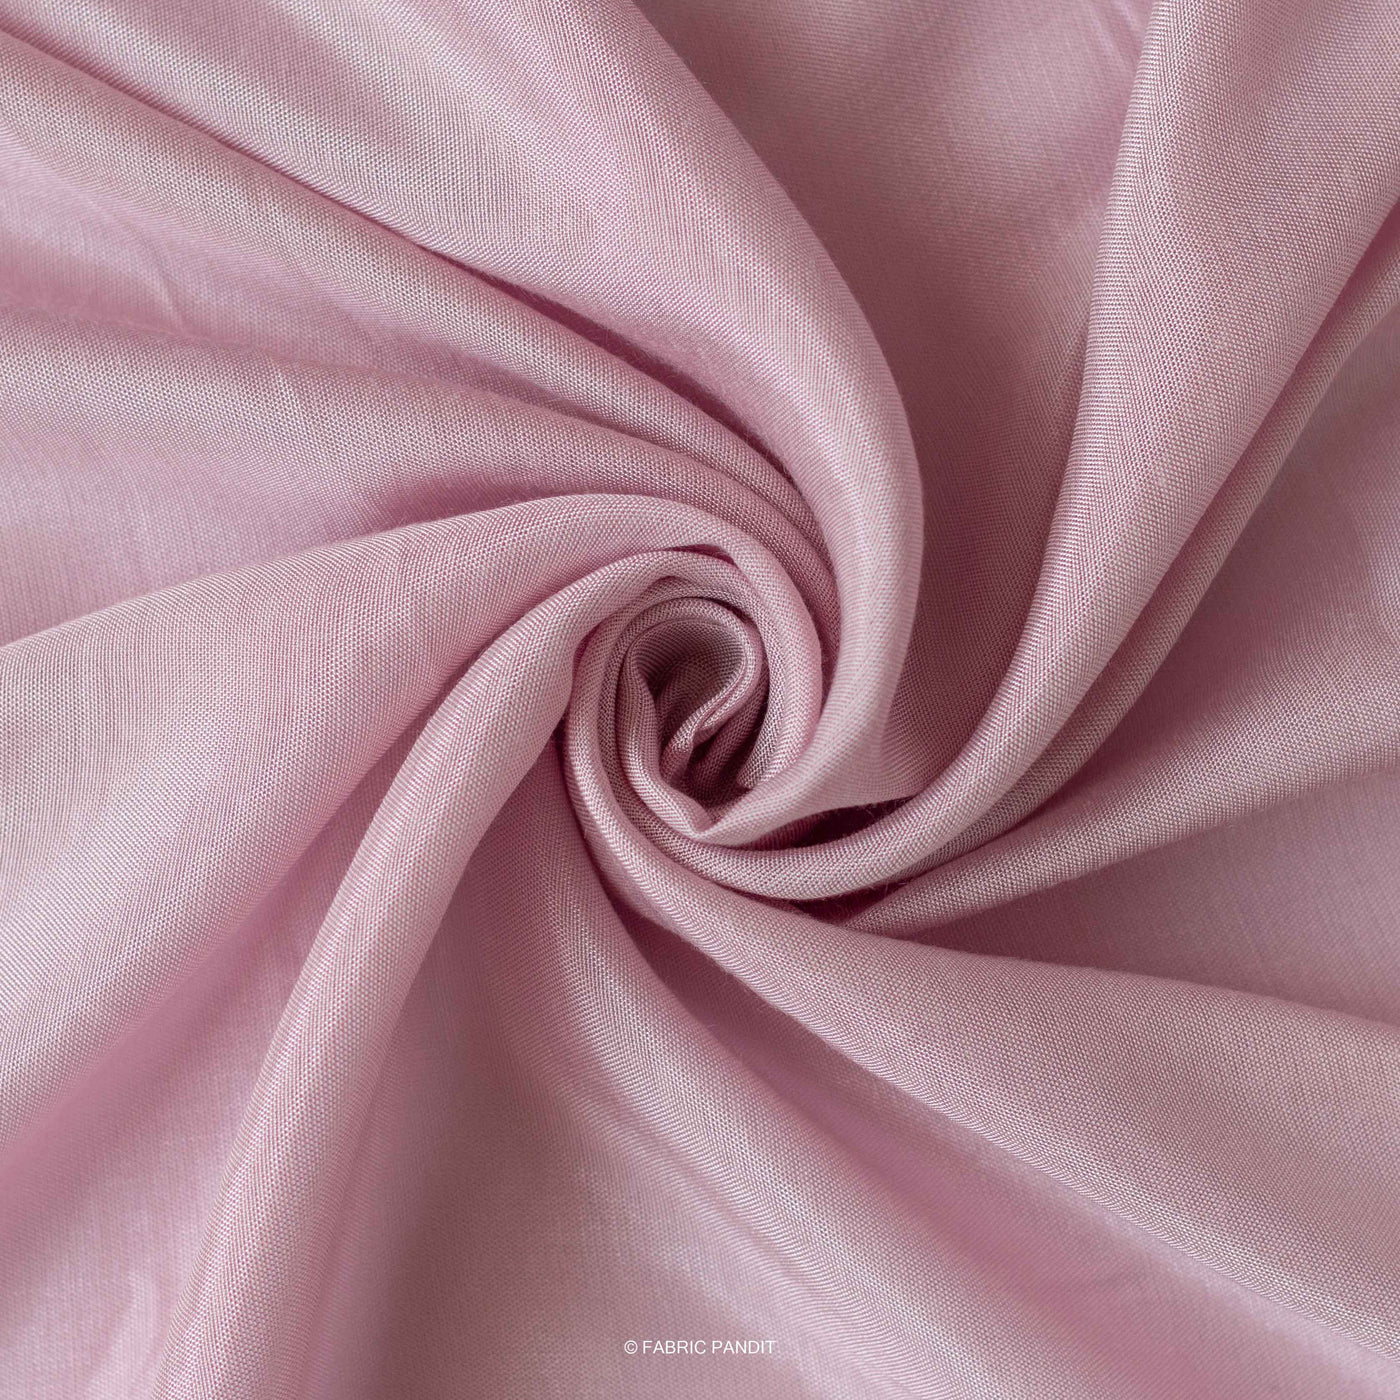 Fabric Pandit Fabric Soft Berry Pink Color Viscose Shantoon Fabric (Width 44 Inches)